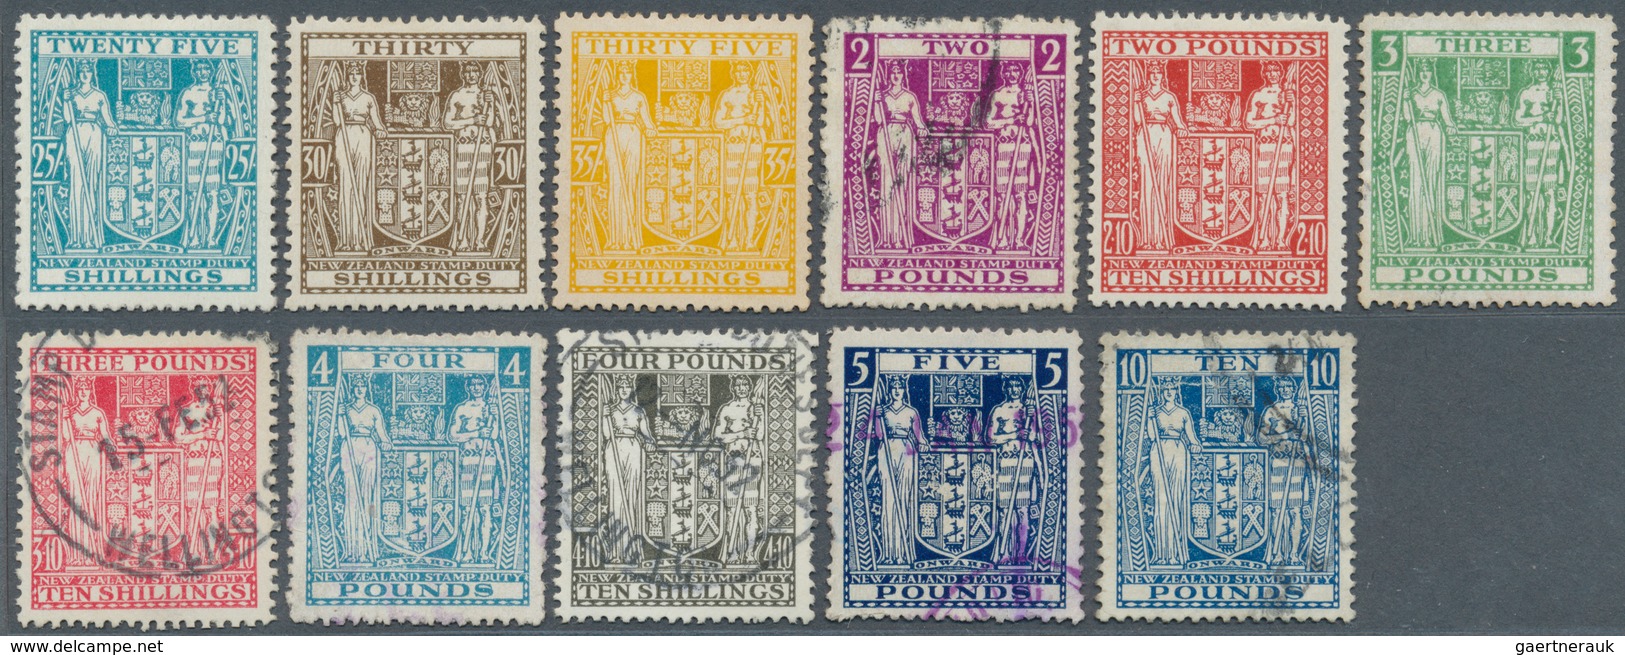 Neuseeland - Stempelmarken: 1931/1967, Mint And Used Collection Of Apprx. 100 Stamps (SG Types F6/F7 - Fiscal-postal